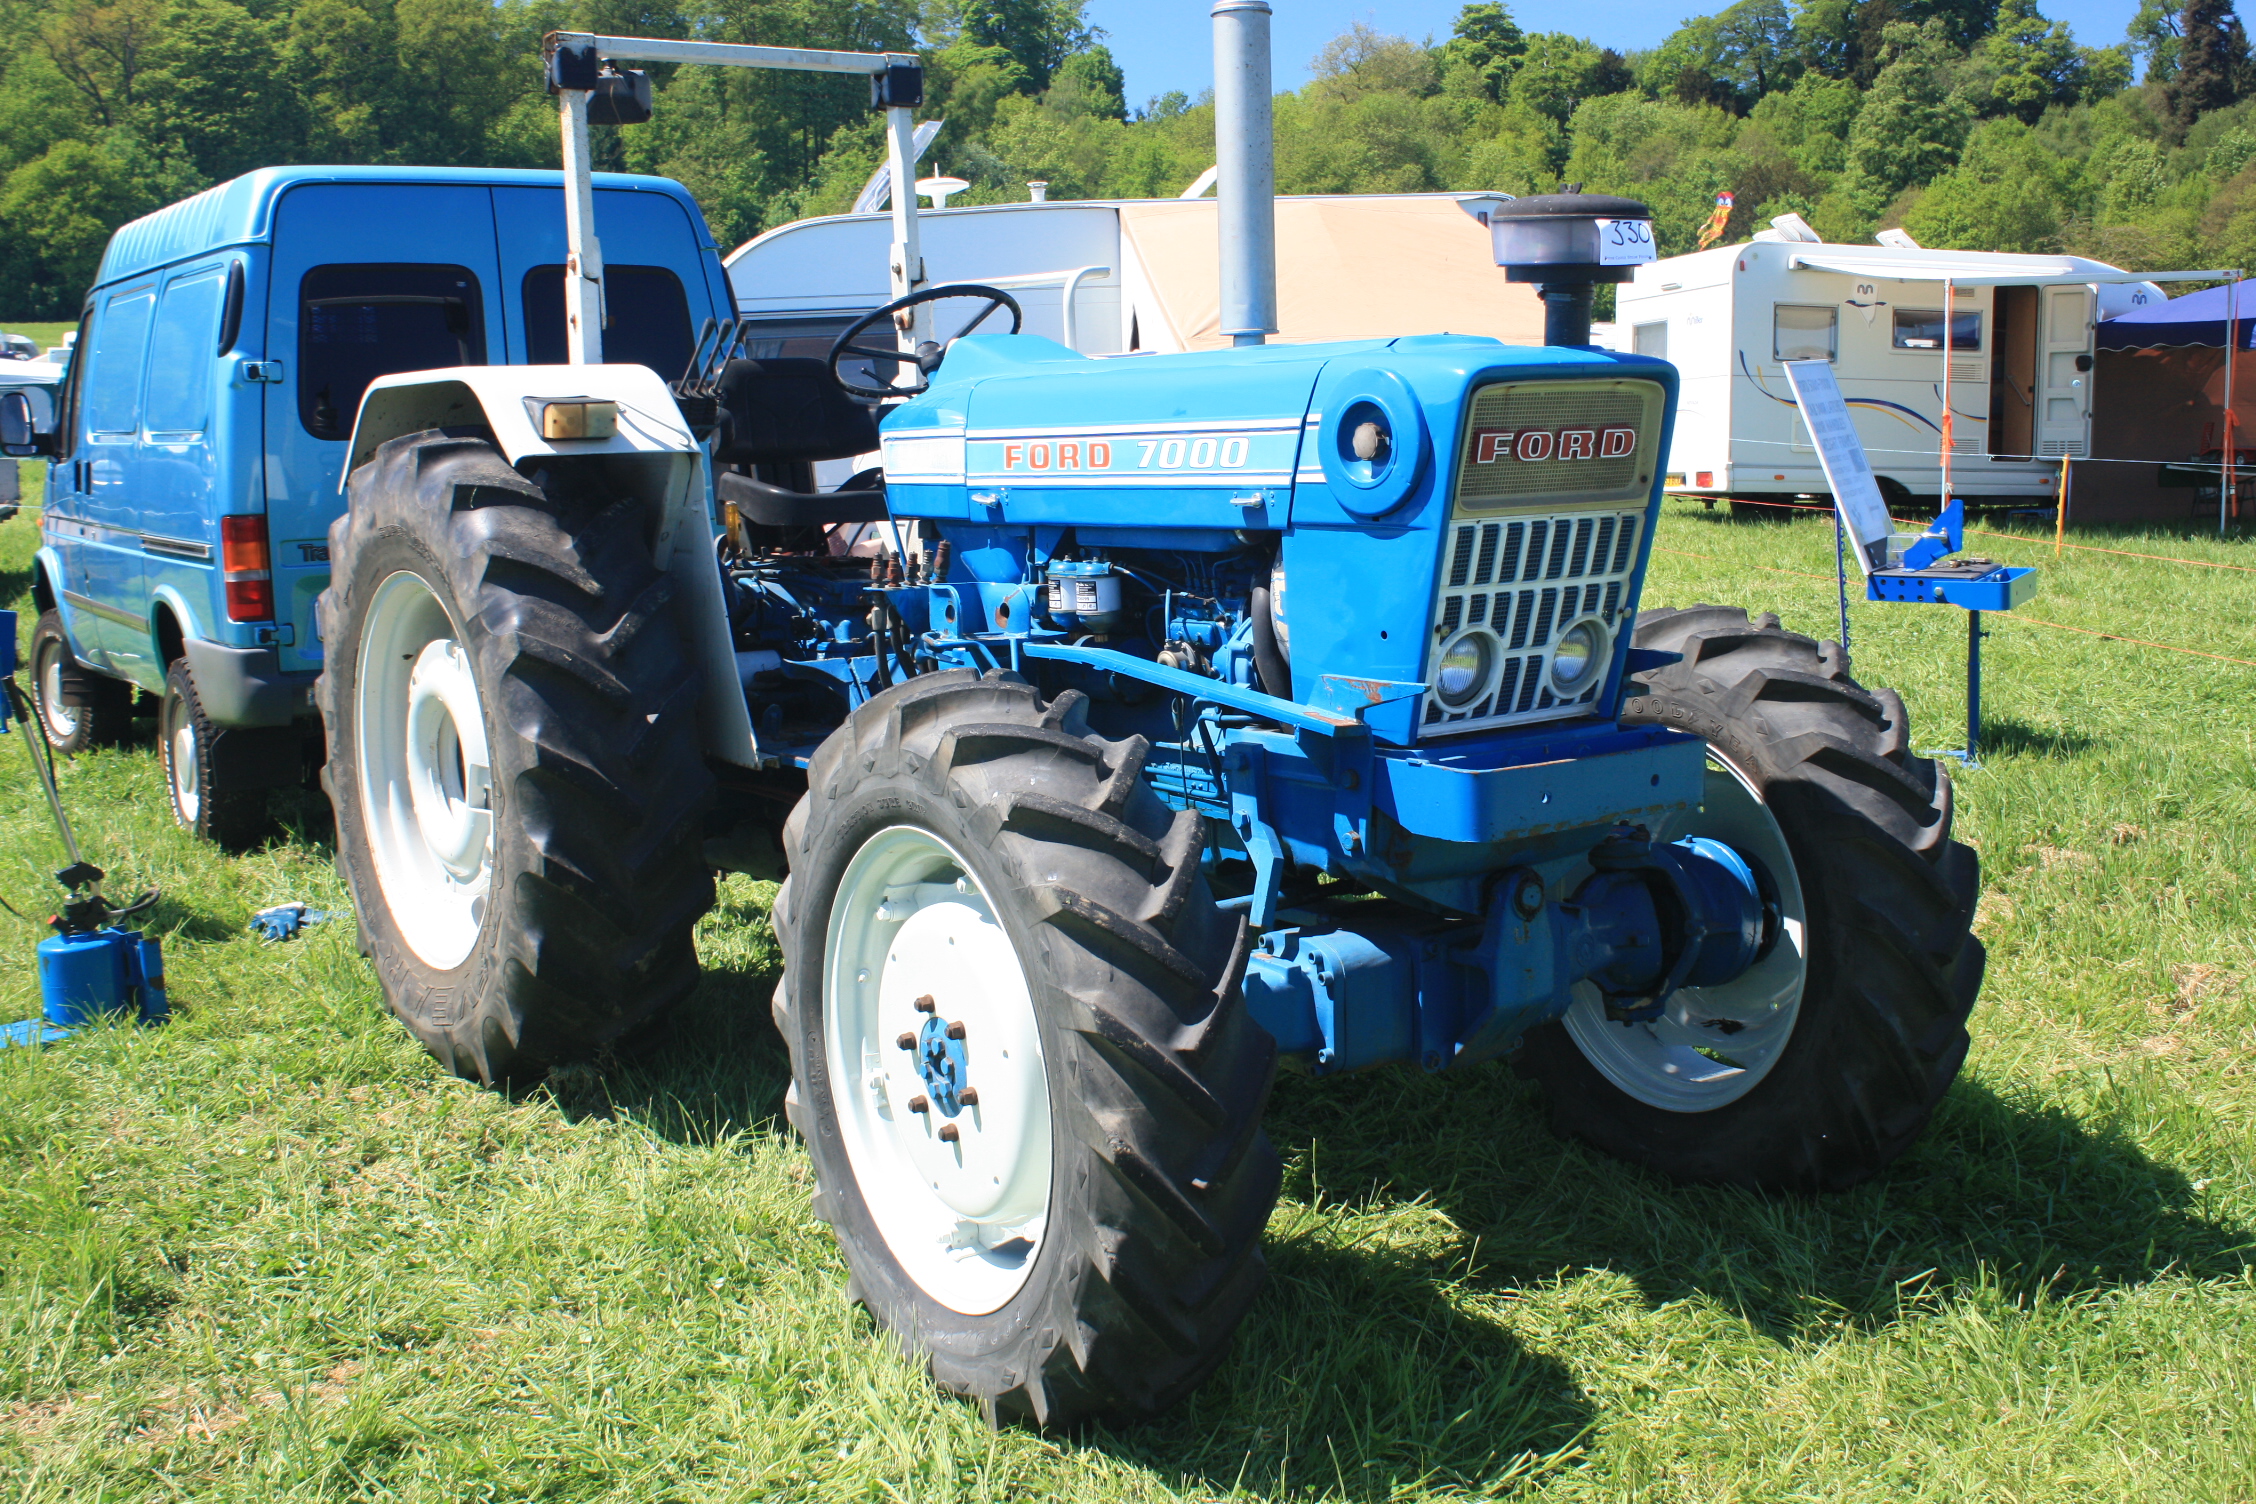 Horsepower 1979 ford 7000 tractor #10